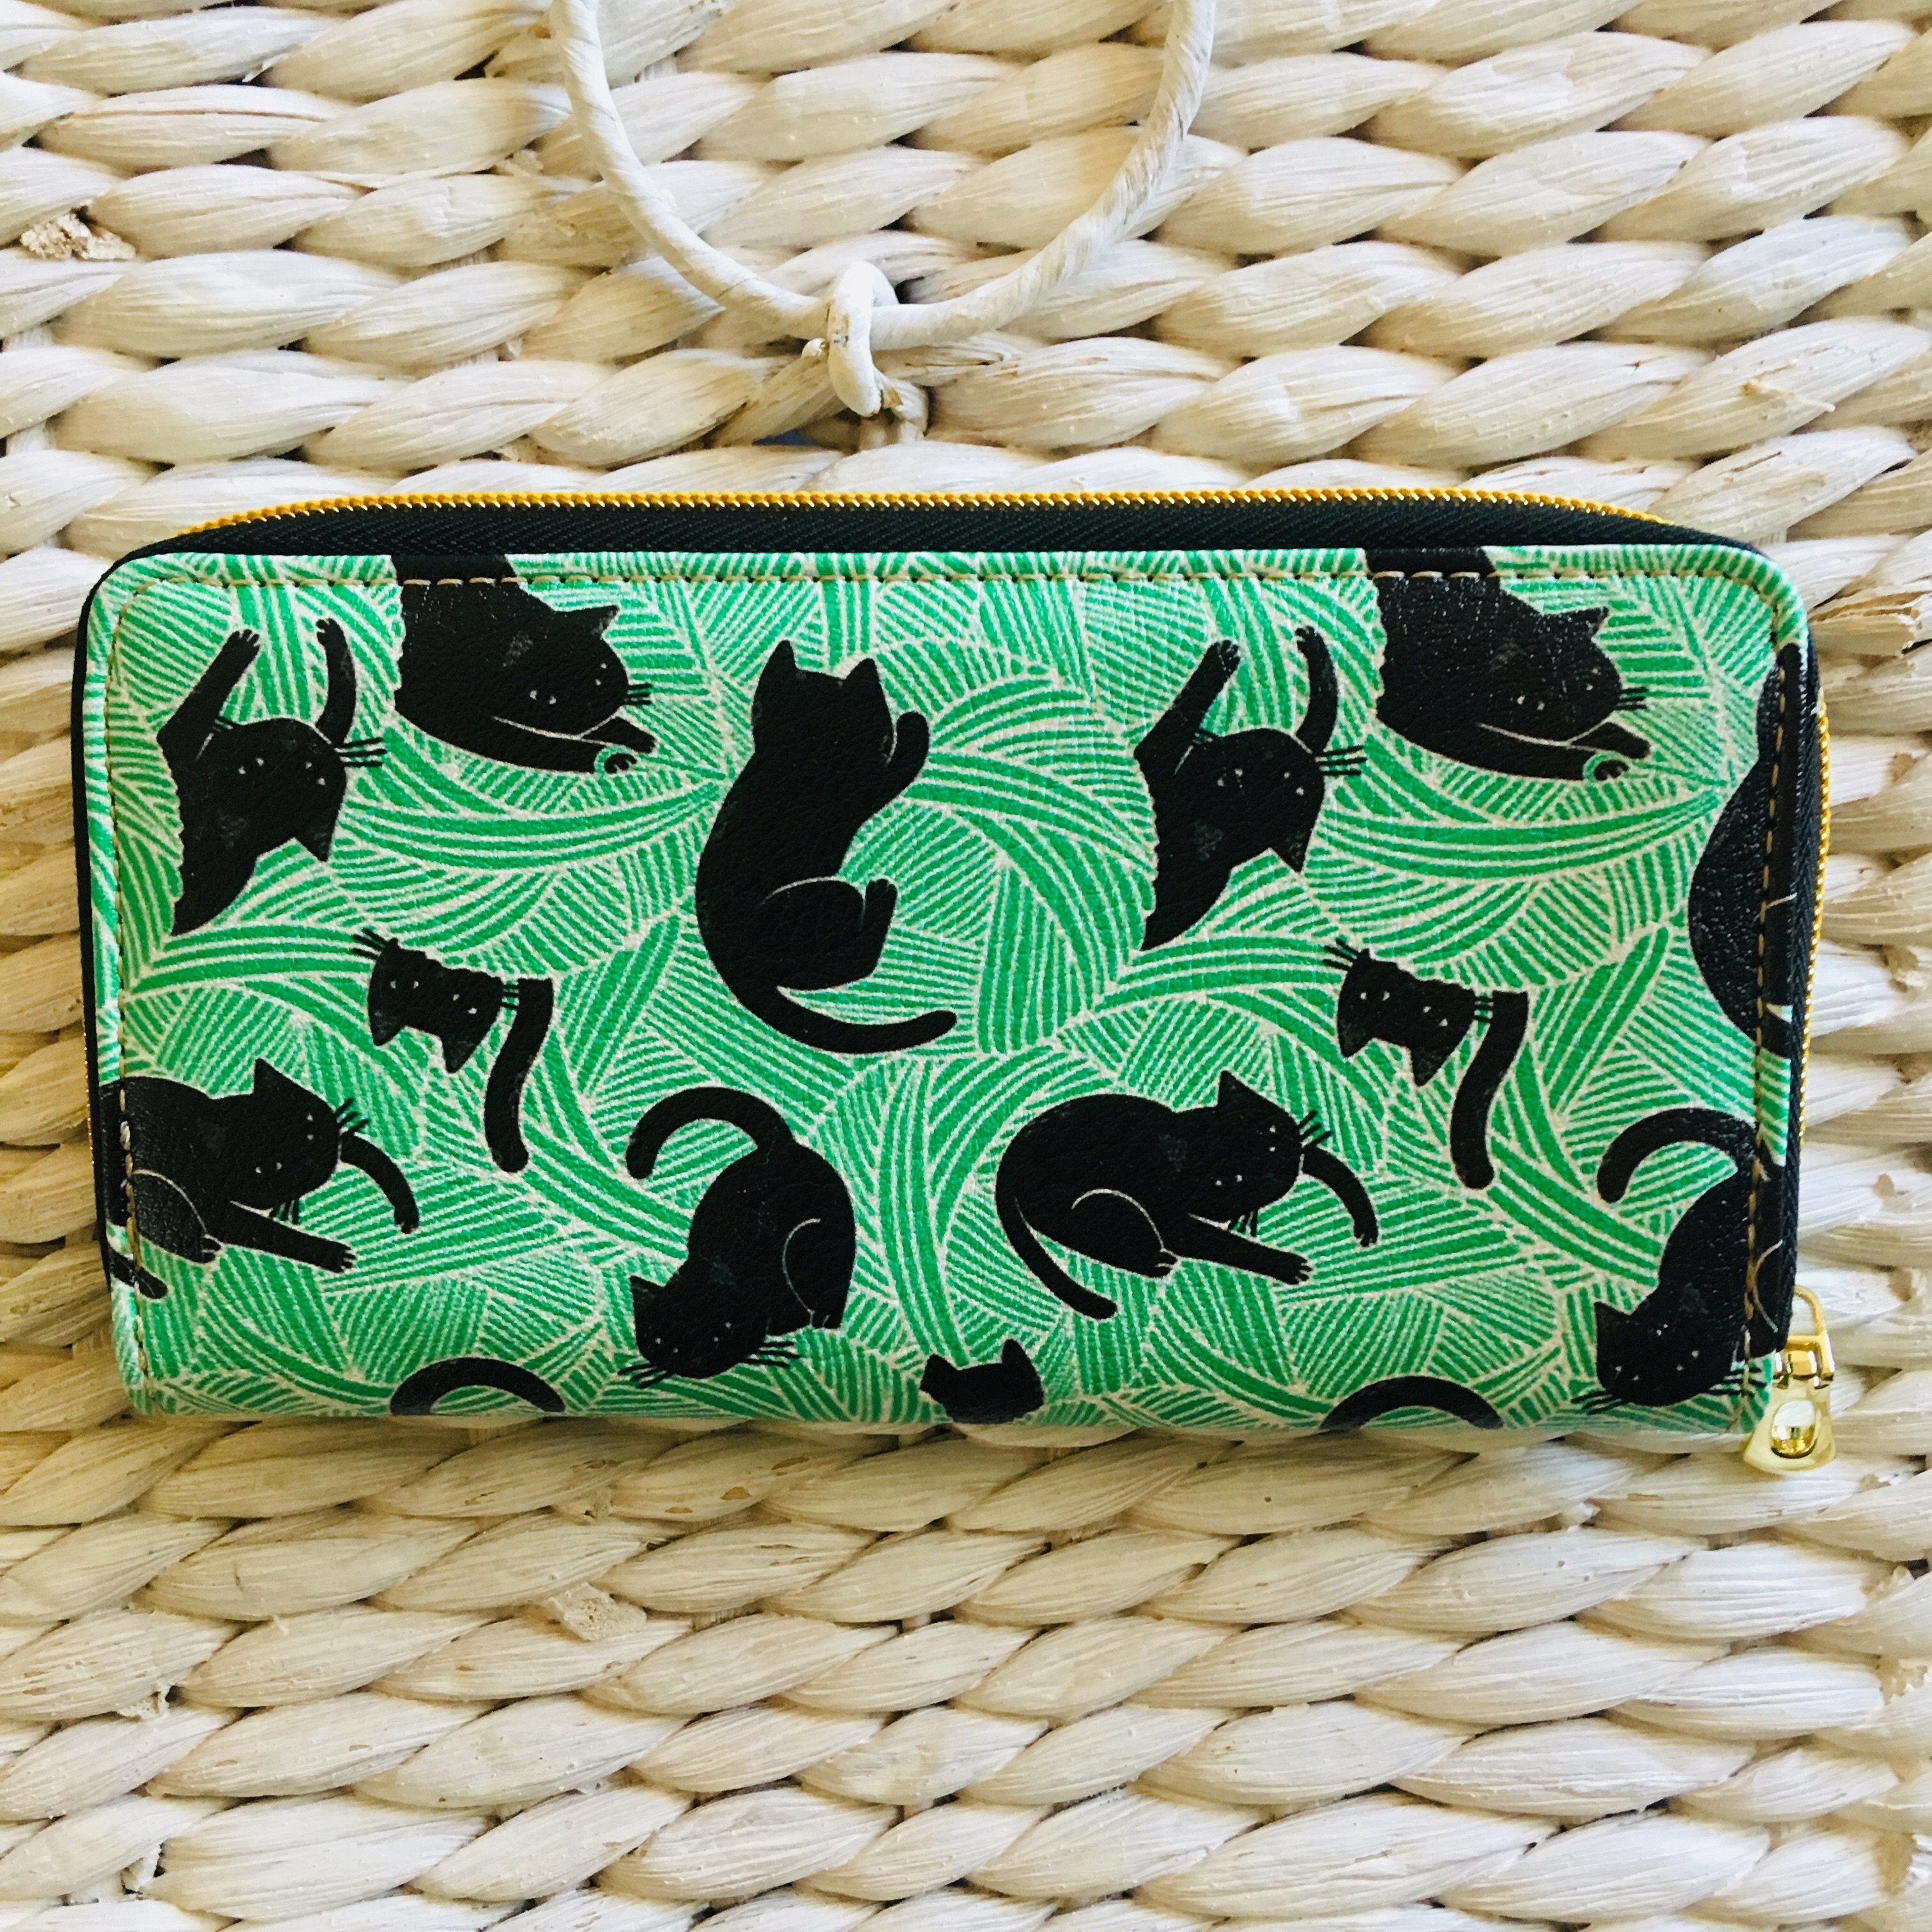 Cat Wallet Made of PU Leather and Decorated with Black Cats Playing With Wool Balls